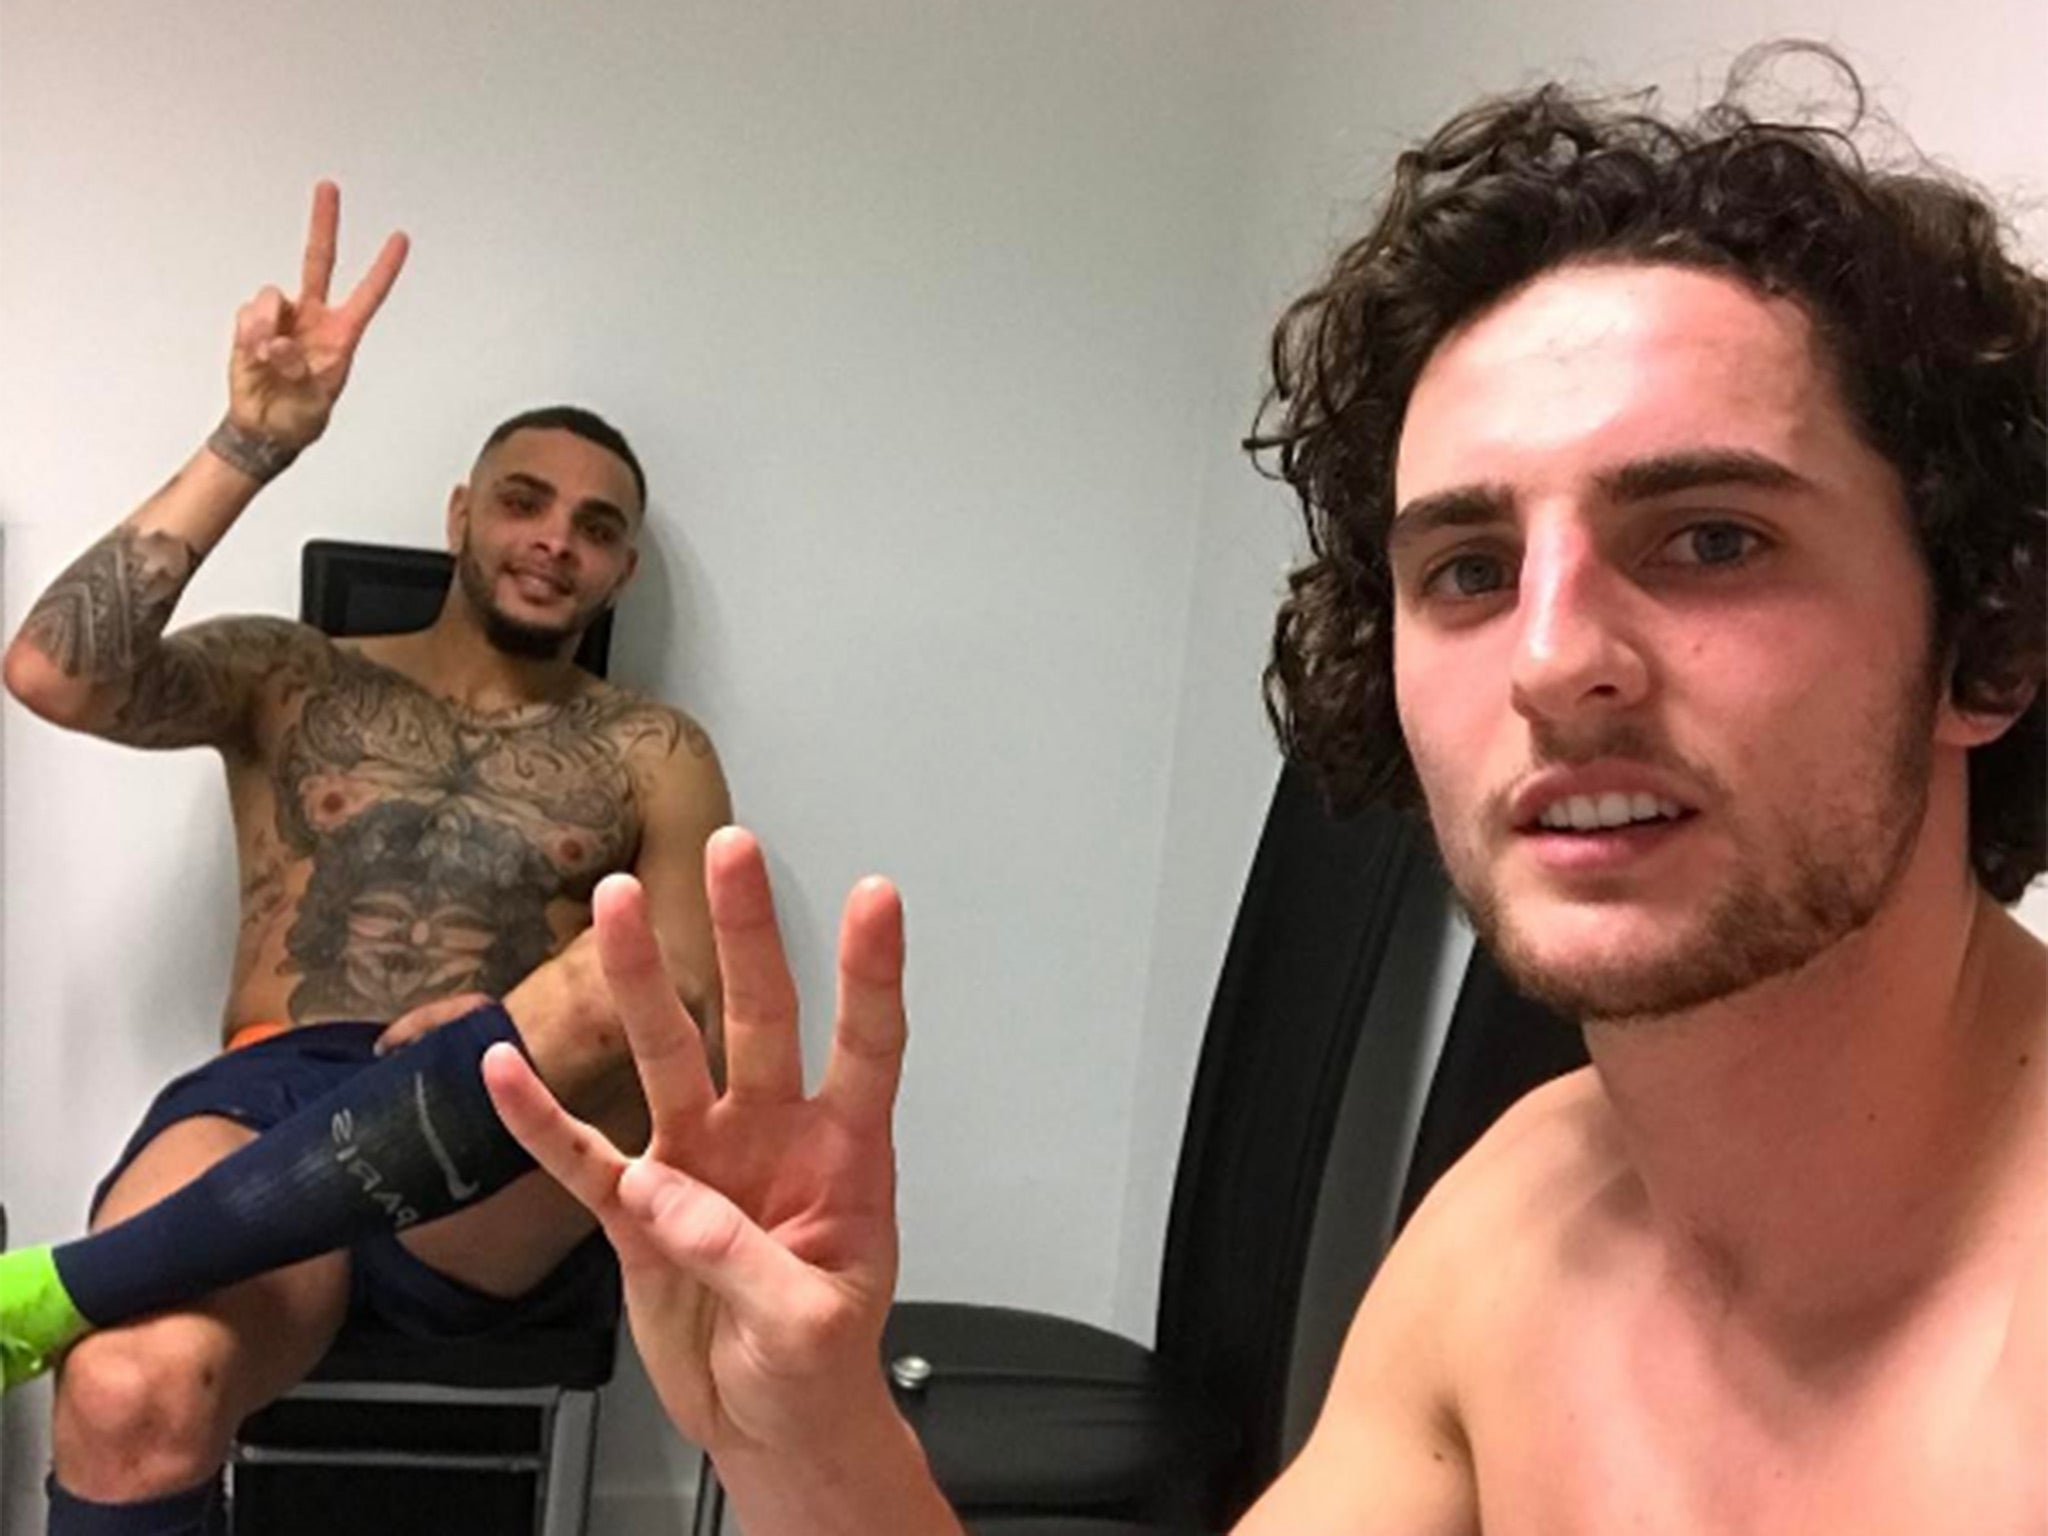 Adrien Rabiot and Layvin Kurzawa revelled in PSG's first-leg win on Instagram